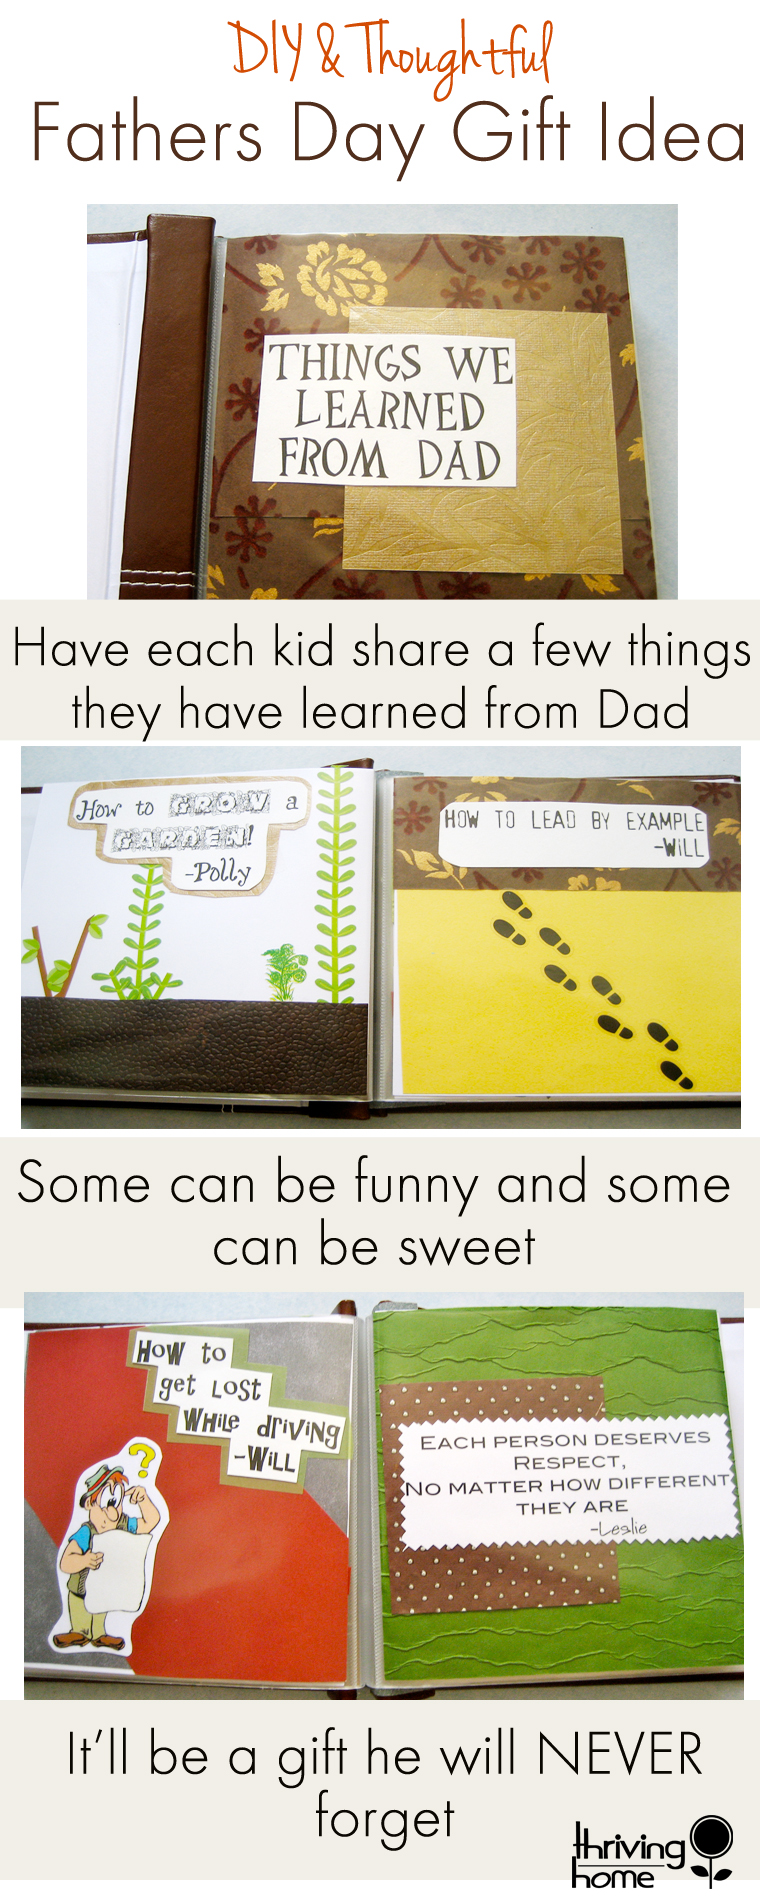 Thoughtful Father’s Day Gift Idea | Thriving Home
